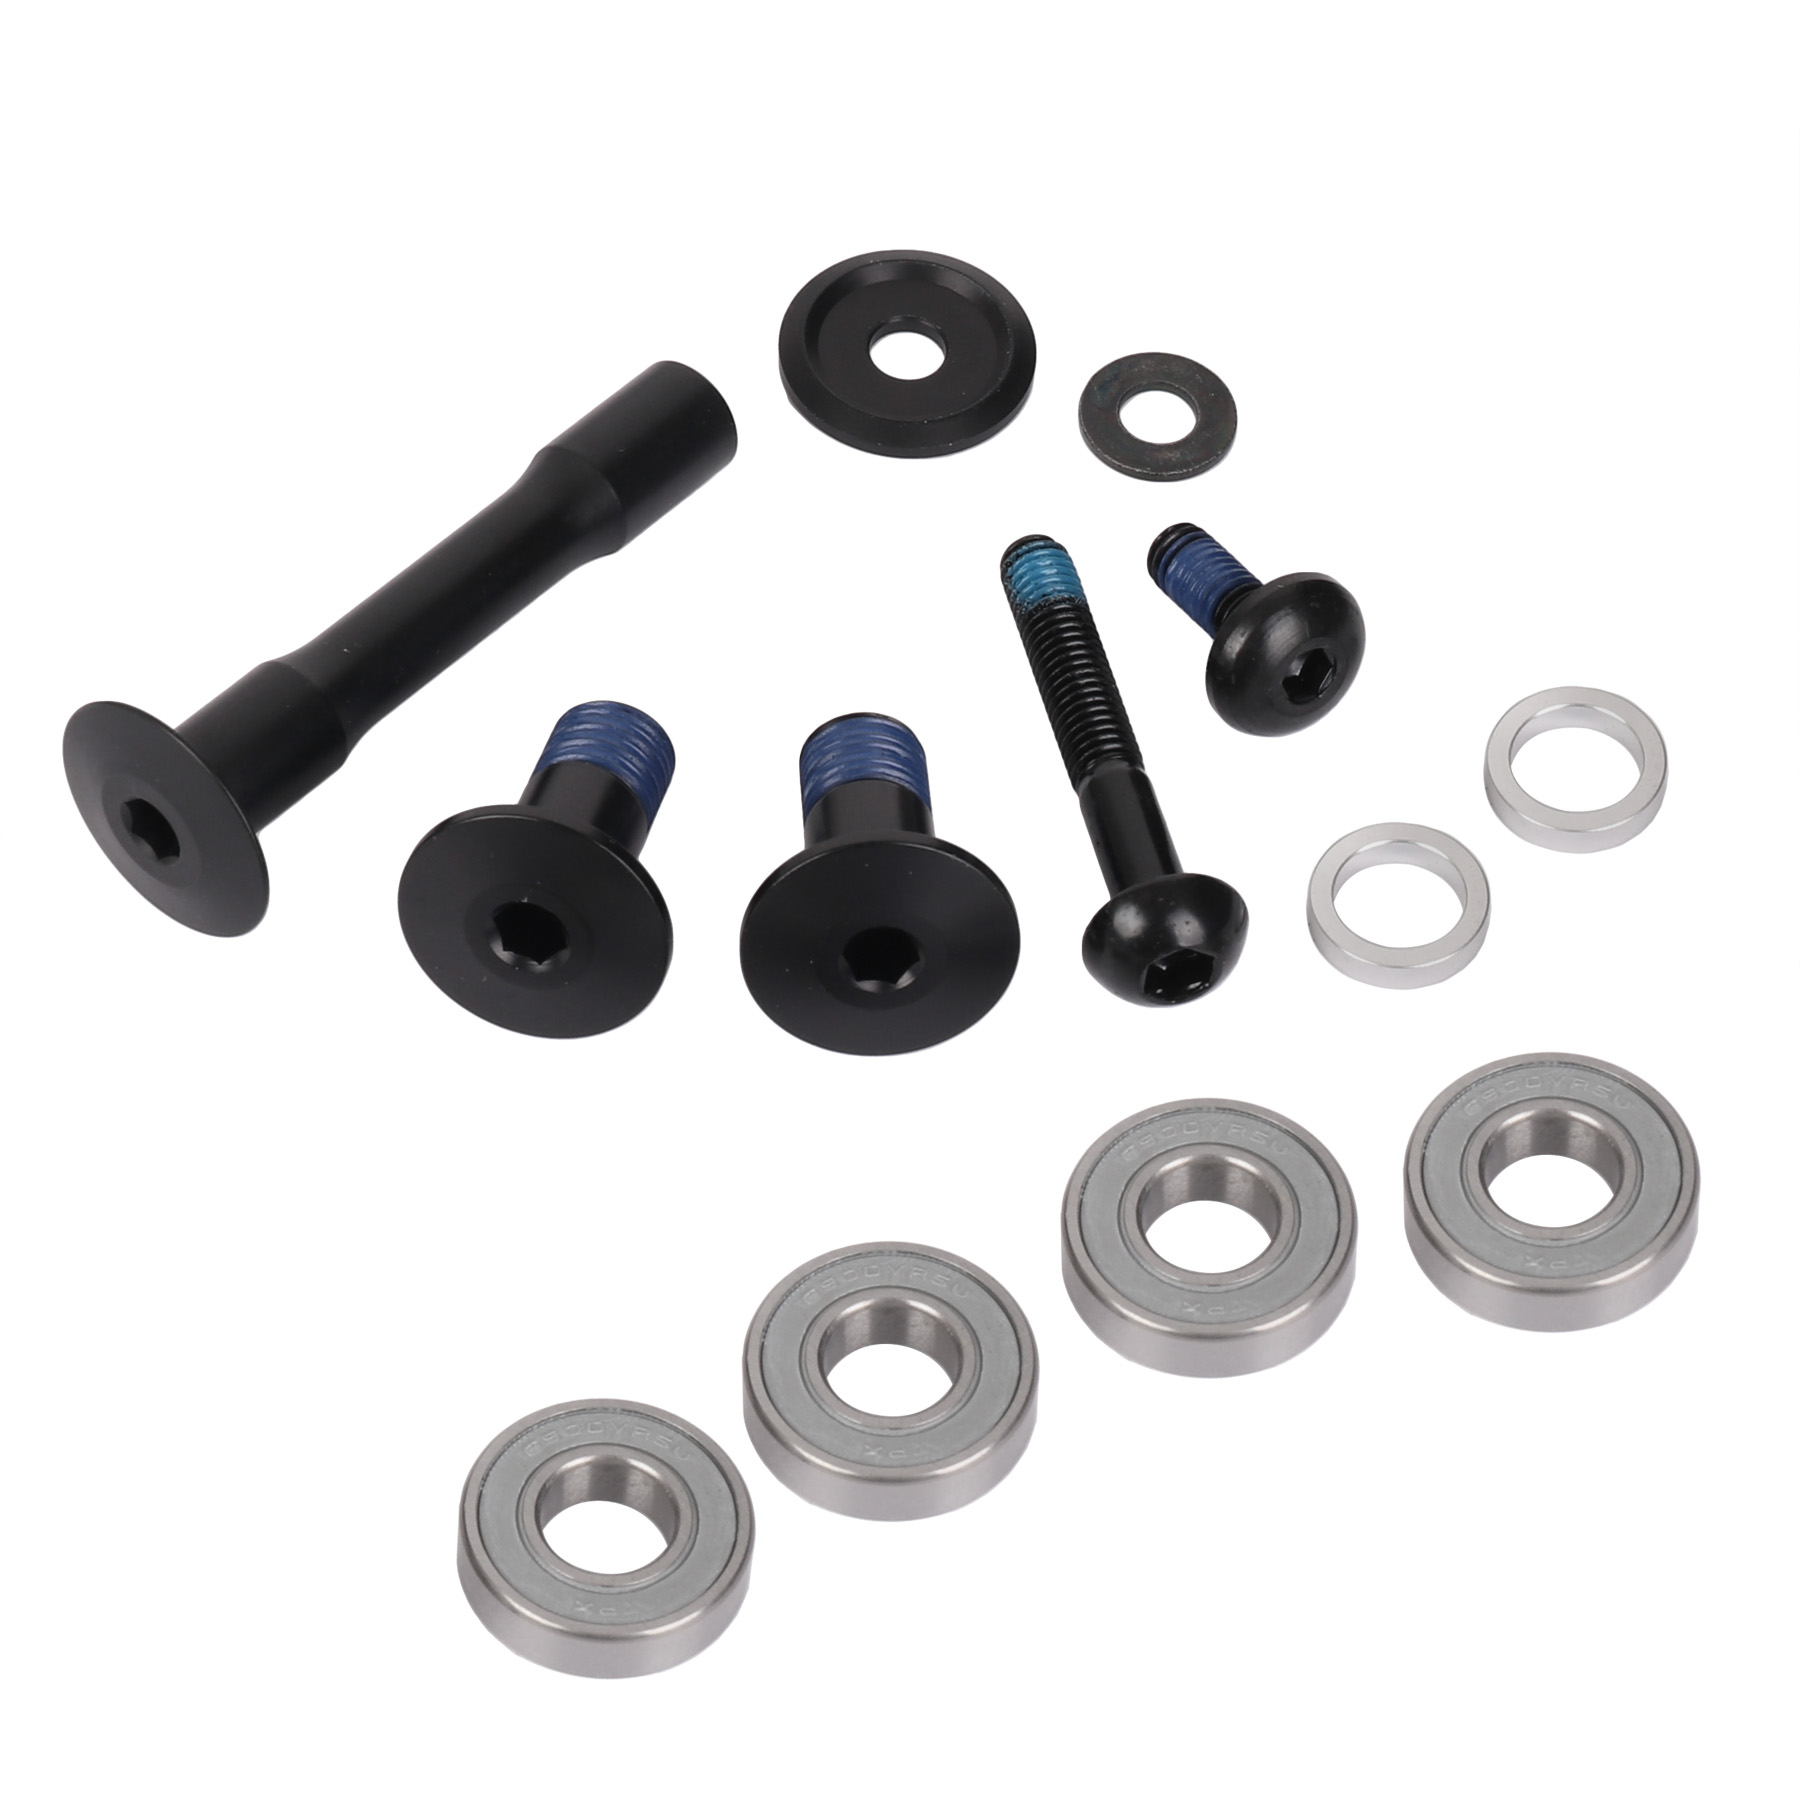 Productfoto van Giant GSF032 Rear Shock Accessories for Stance / Embolden | Rock Arm Bolt Kit - 1280GSF03204A1